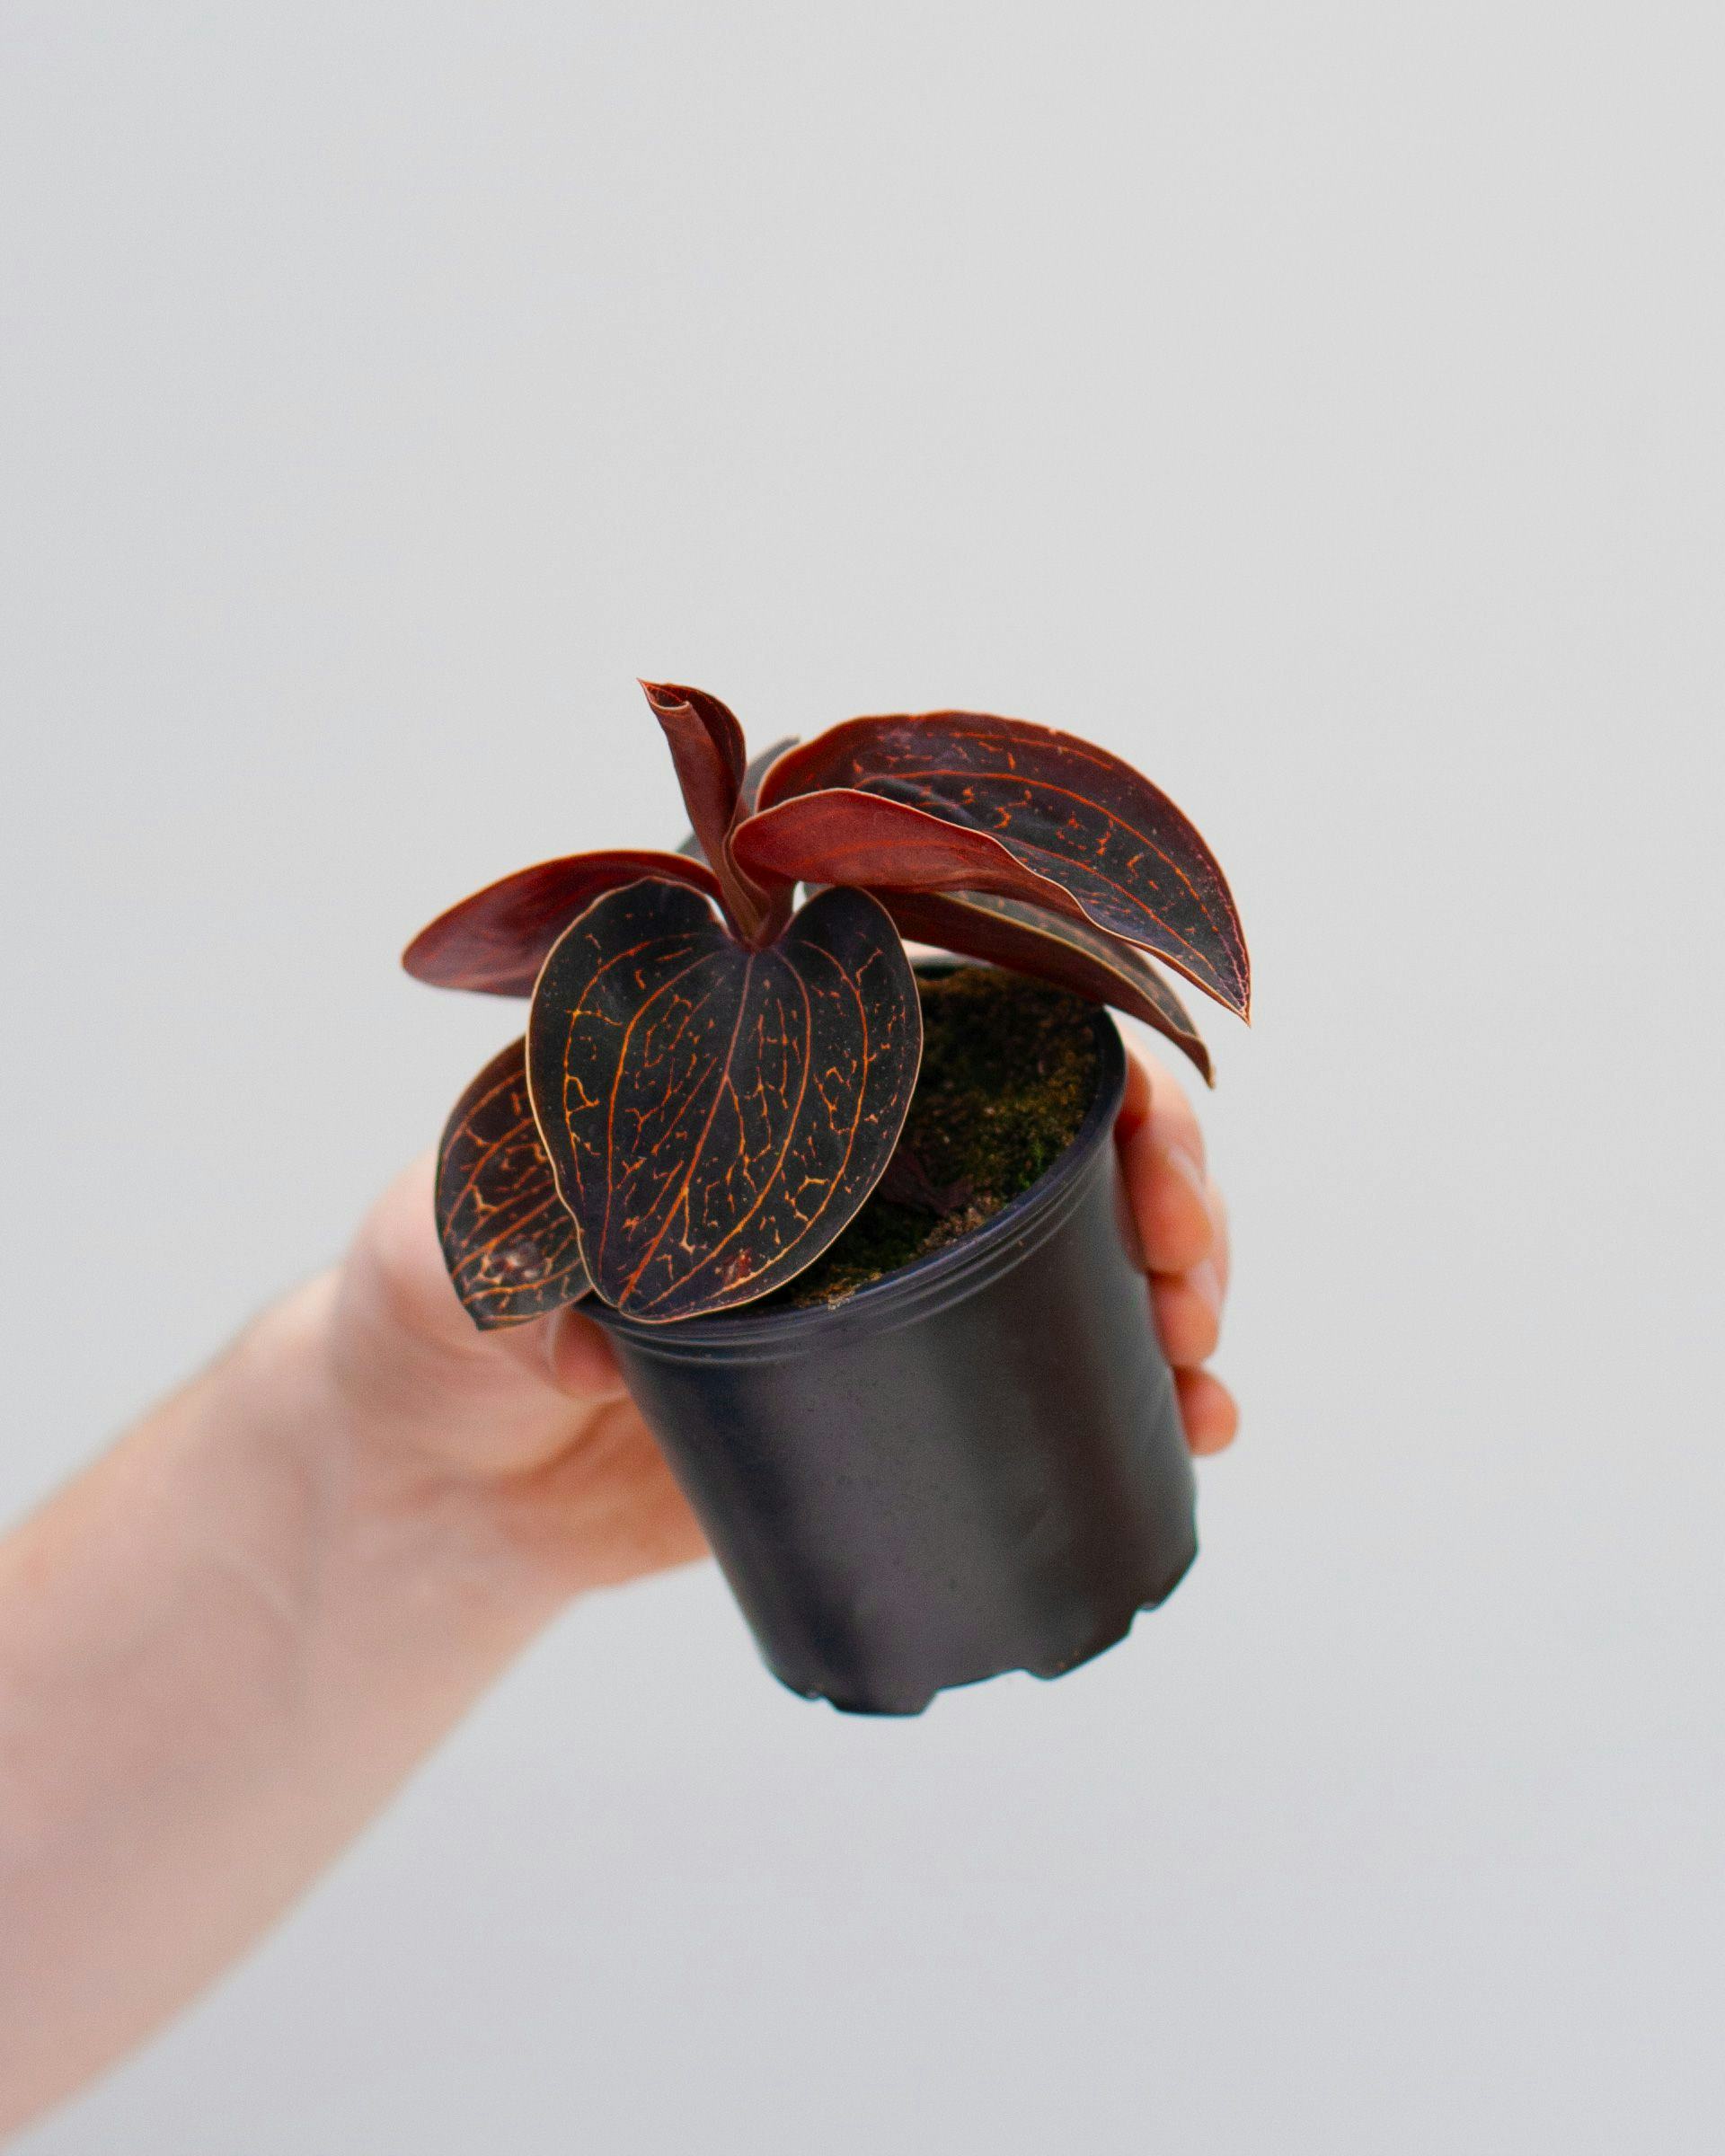 Jewel Orchid Anoectochilus Chapaensis